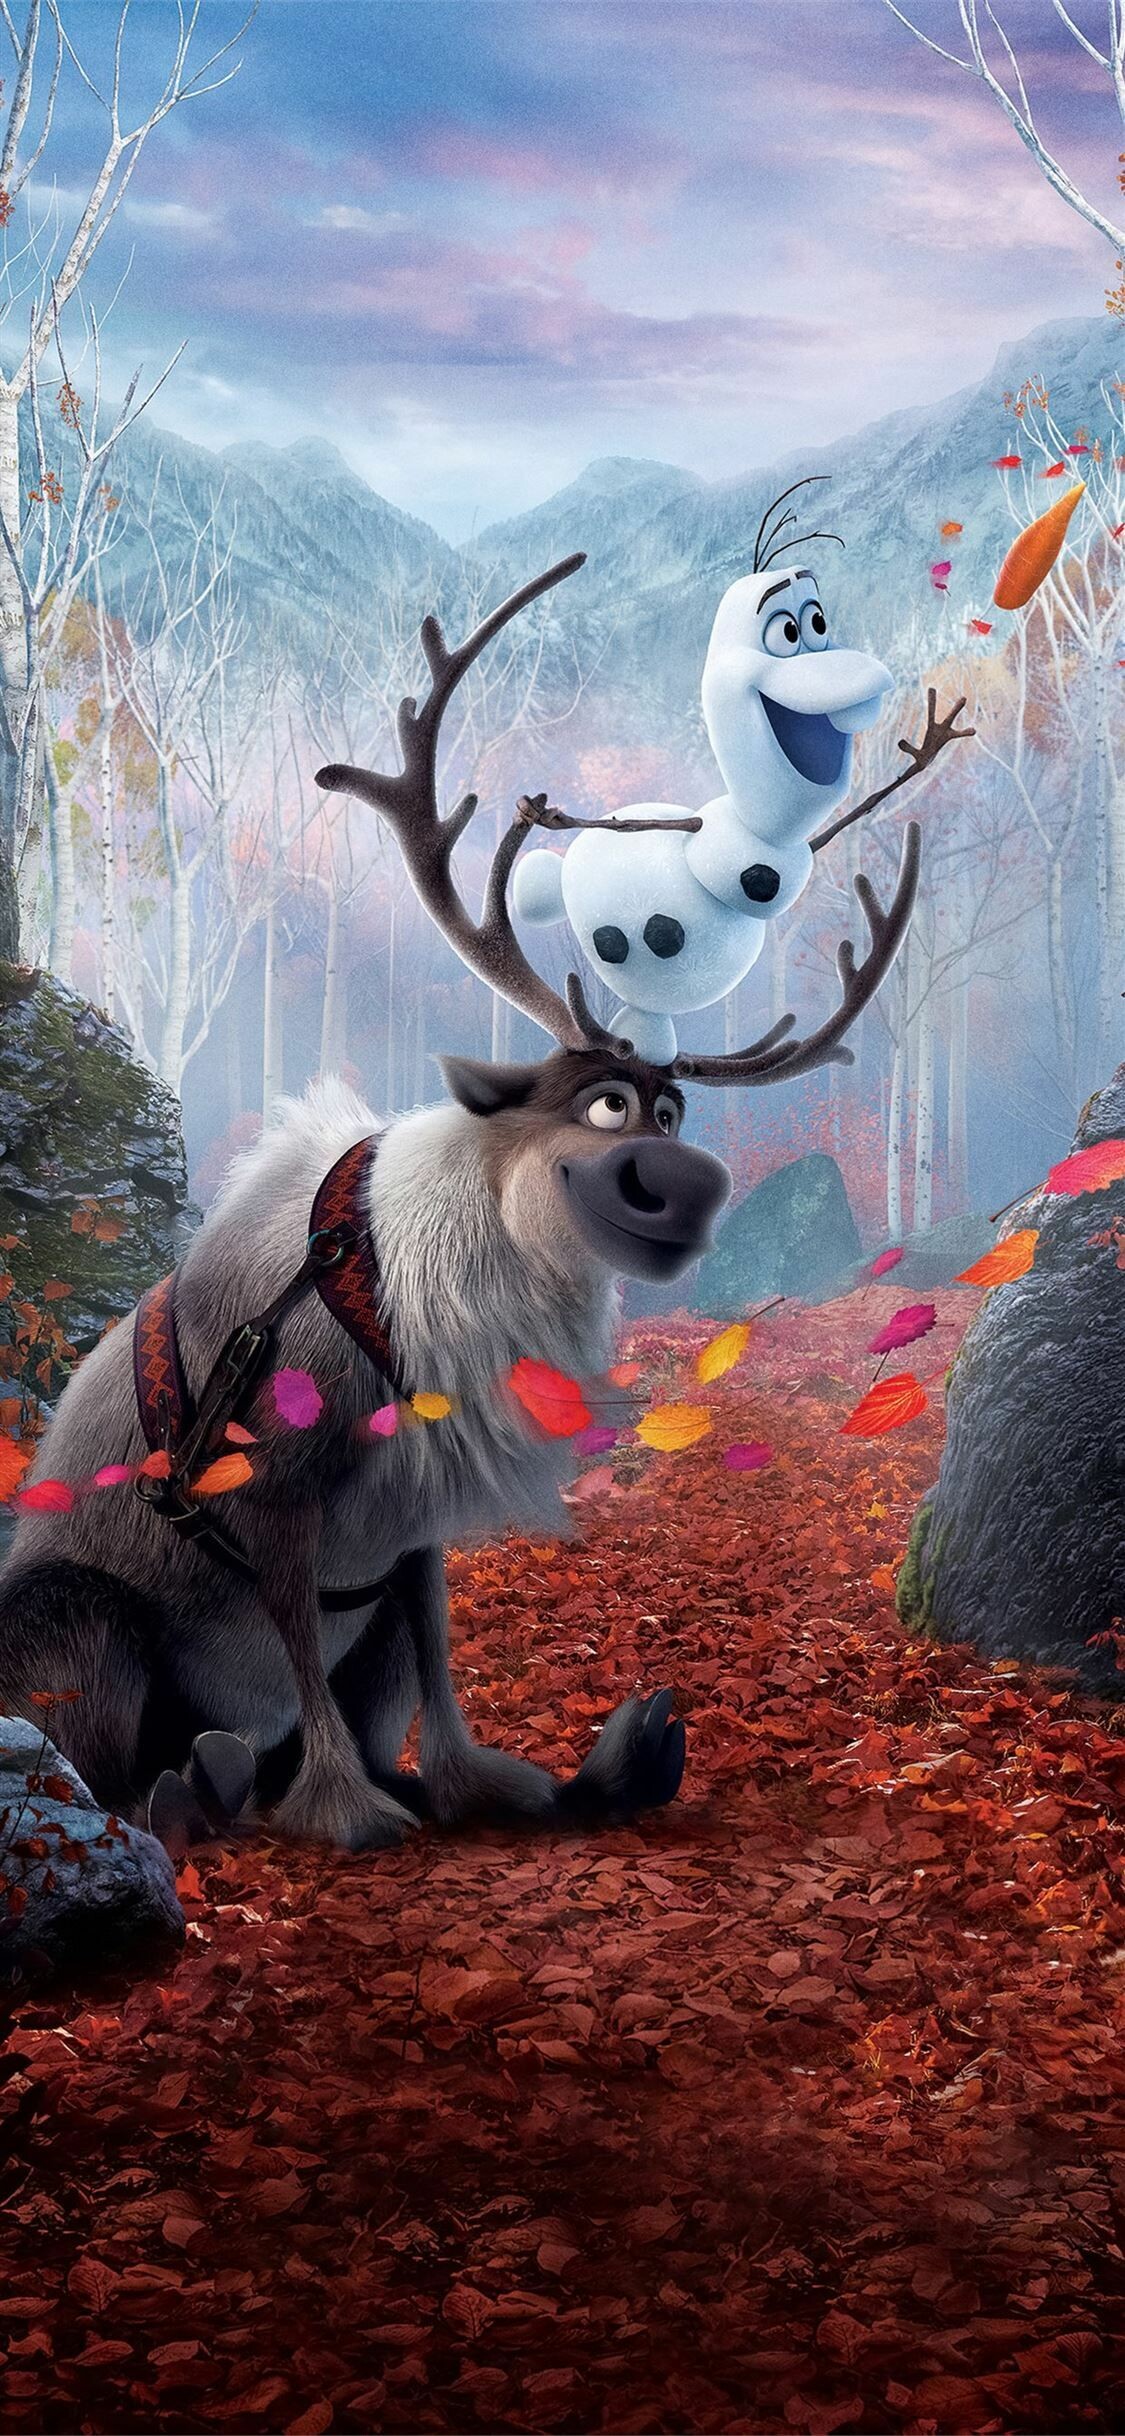 Frozen: Olaf, Sven, Enchanted Forest, Animation. 1130x2440 HD Wallpaper.